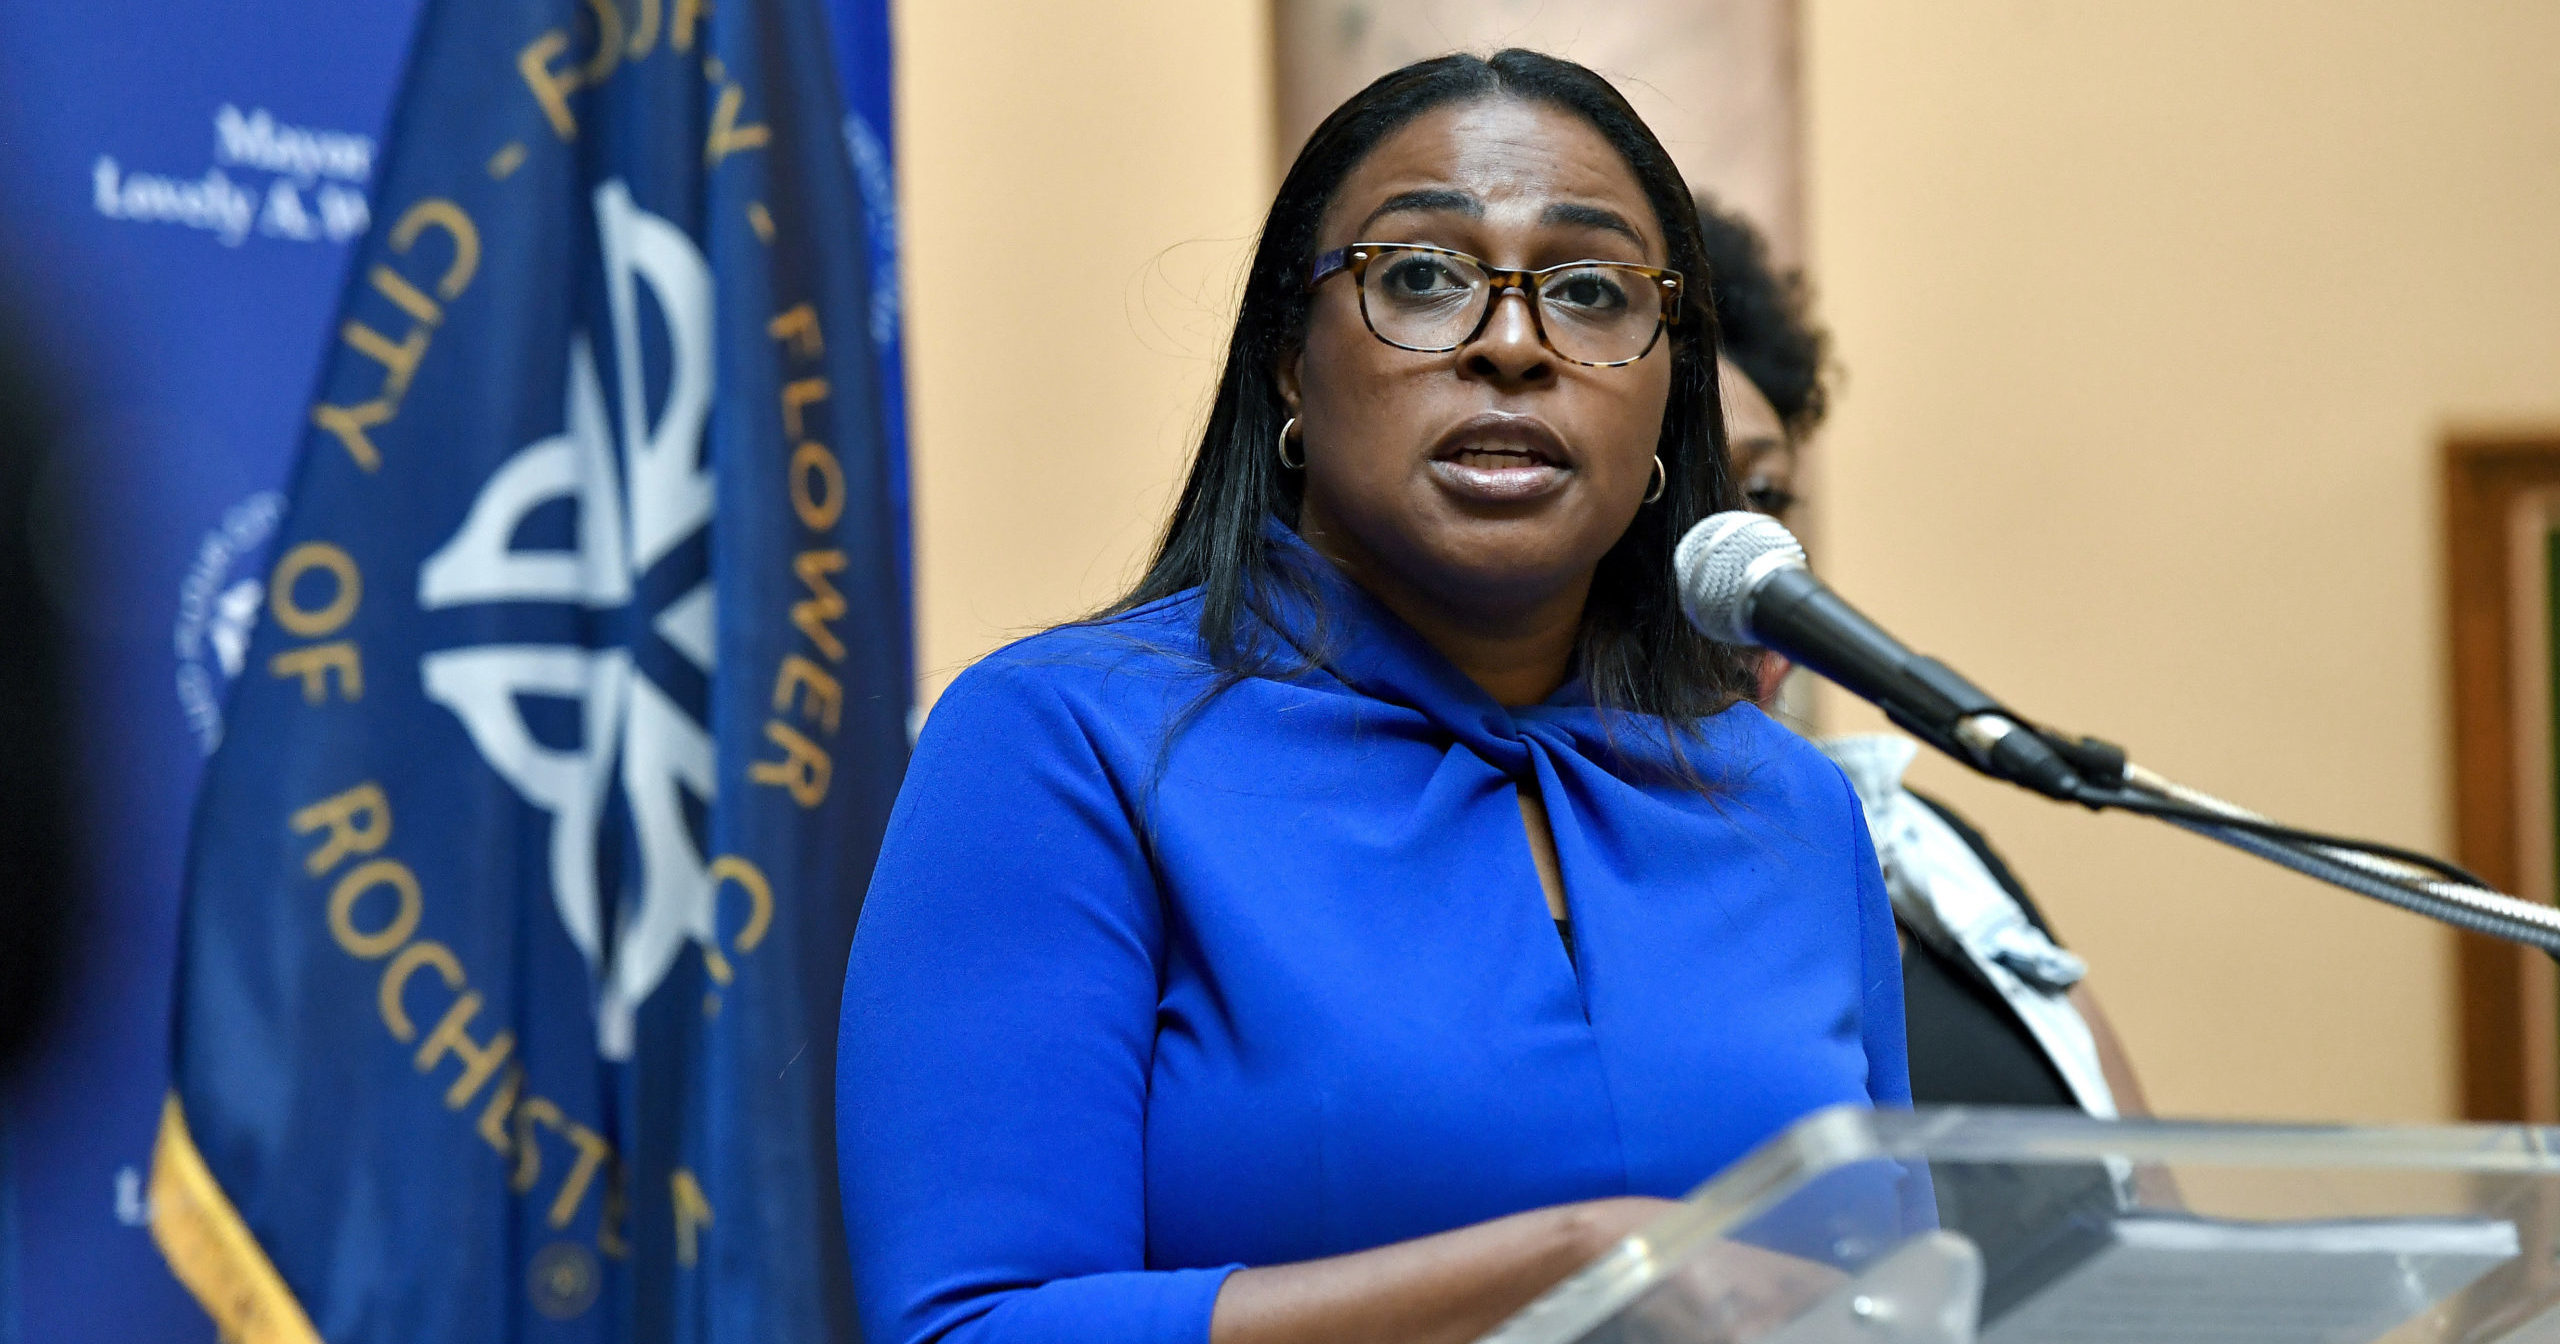 In this Sept. 3, 2020, file photo, Rochester Mayor Lovely Warren speaks during a news conference in Rochester, New York. Warren was indicted on Oct. 2 on charges she broke campaign finance rules and committed fraud during her reelection campaign three years ago.